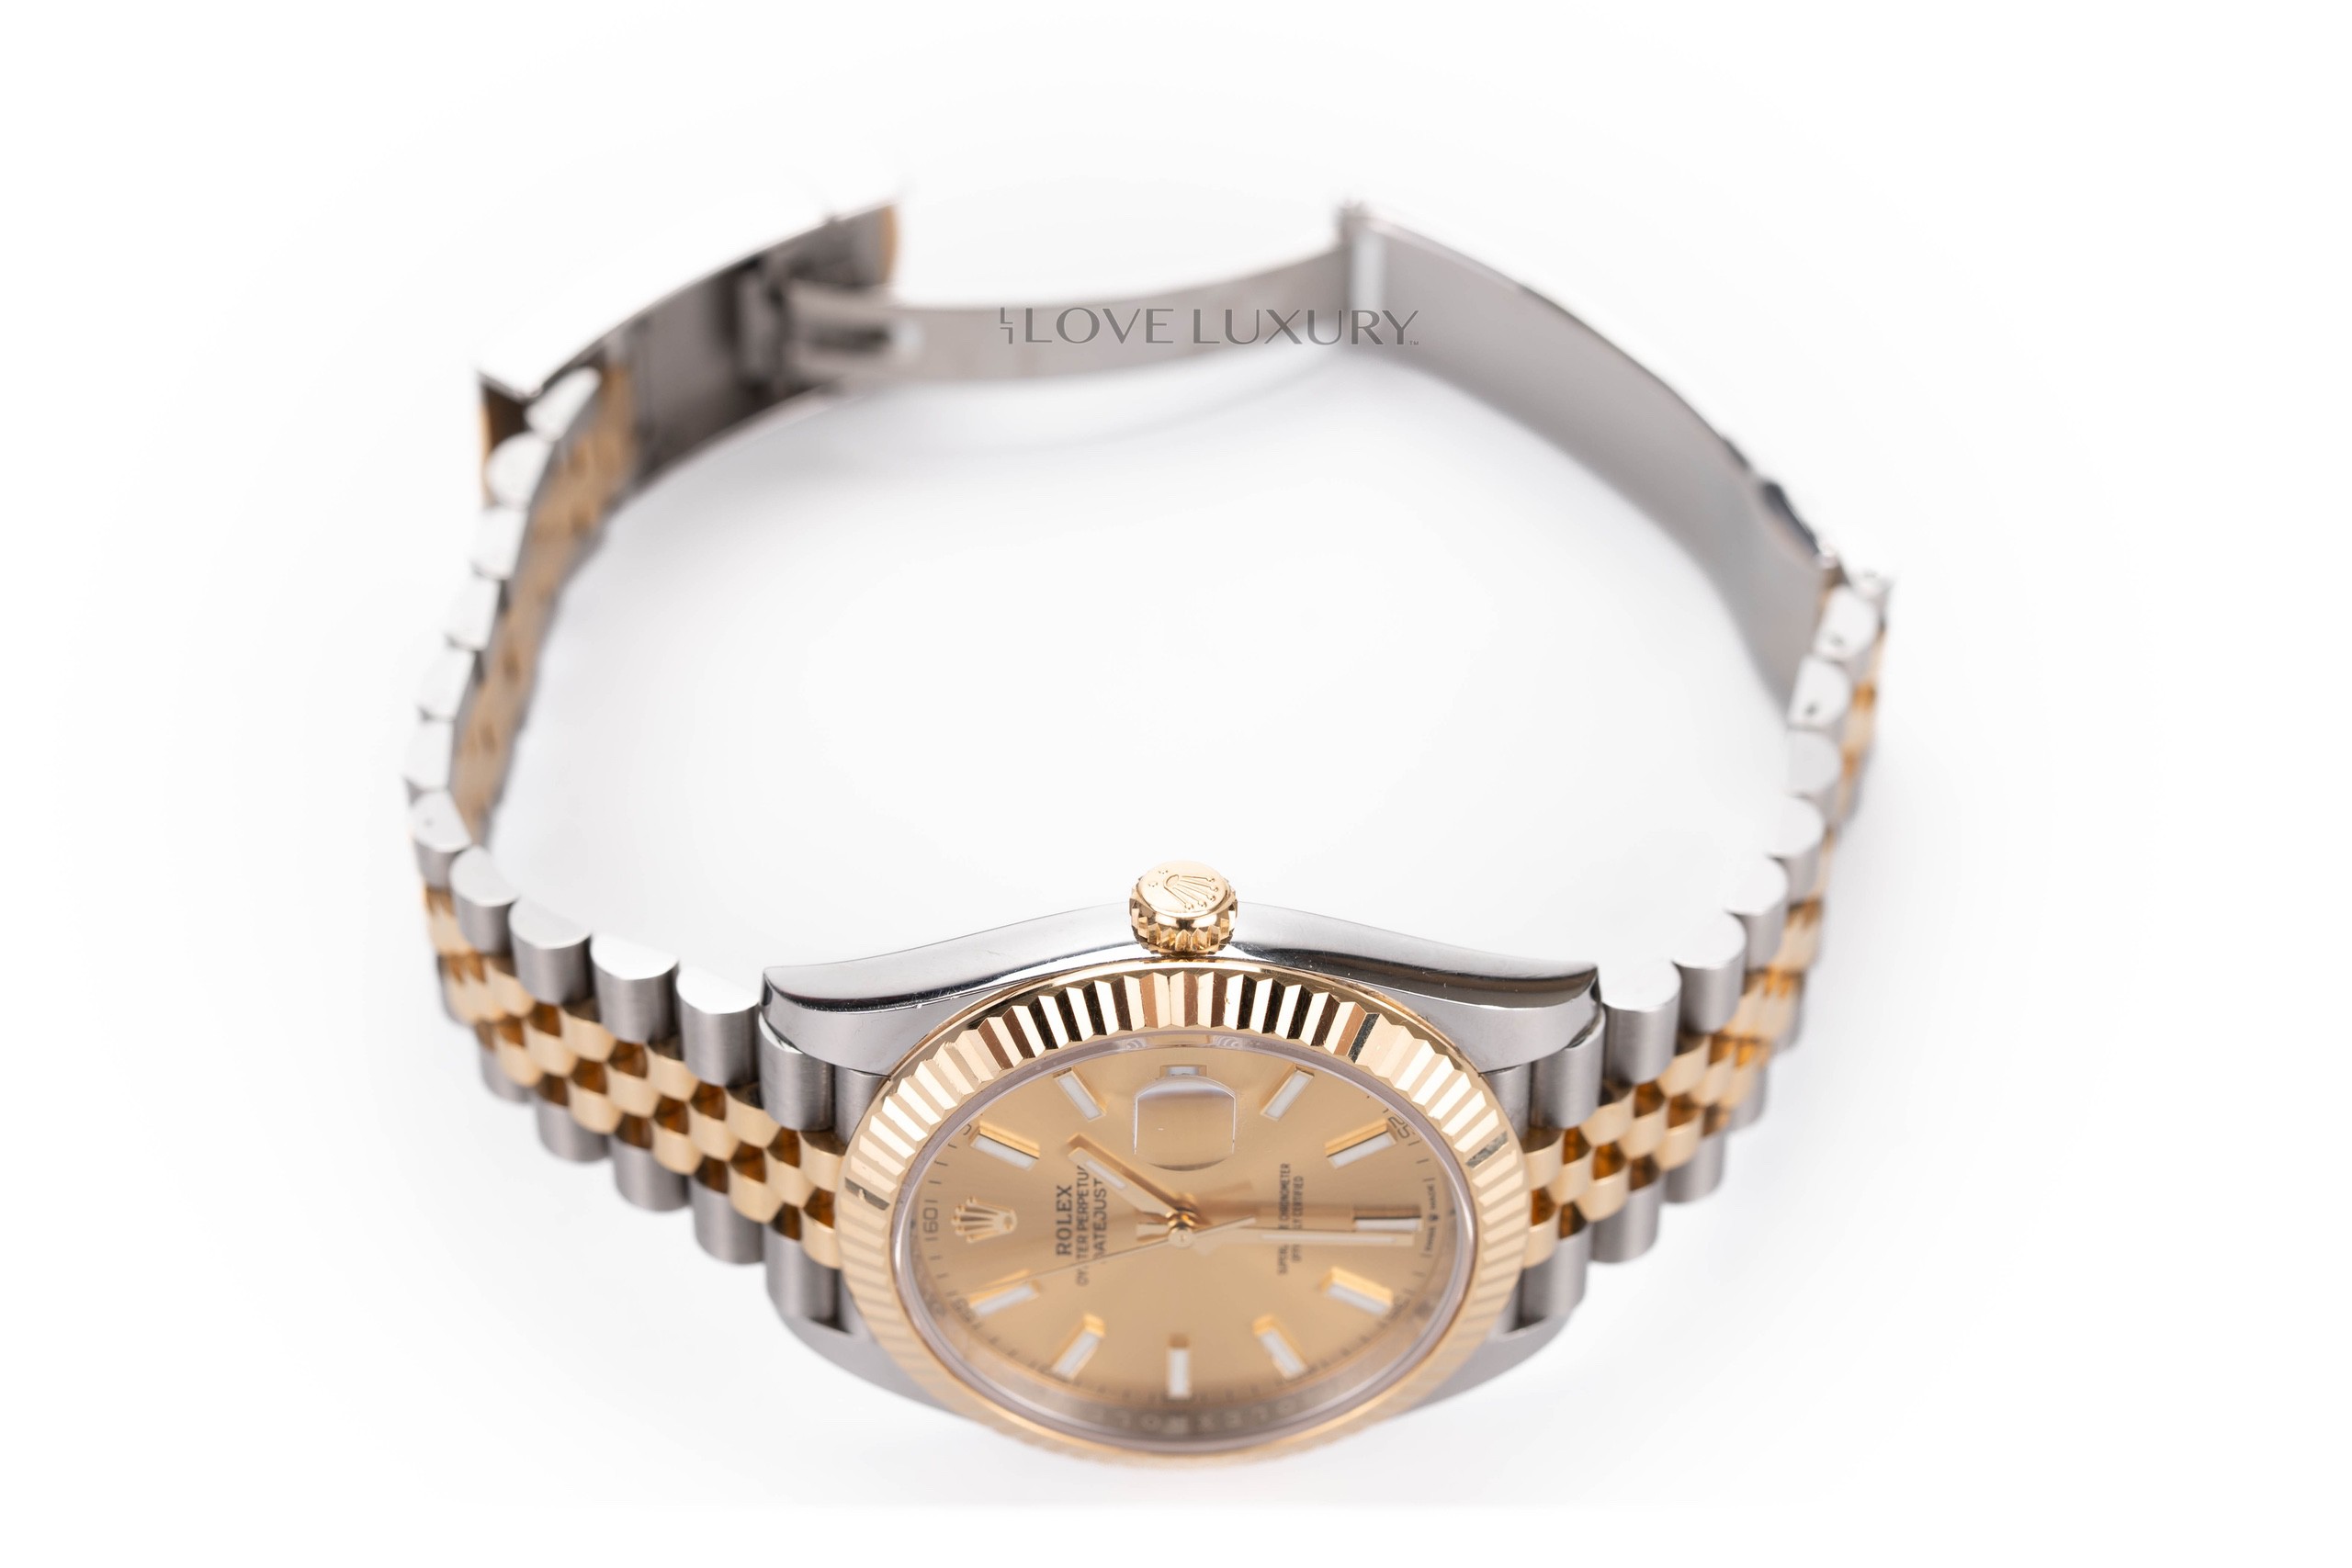 Rolex-datejust-two-tone-golden-dial-7